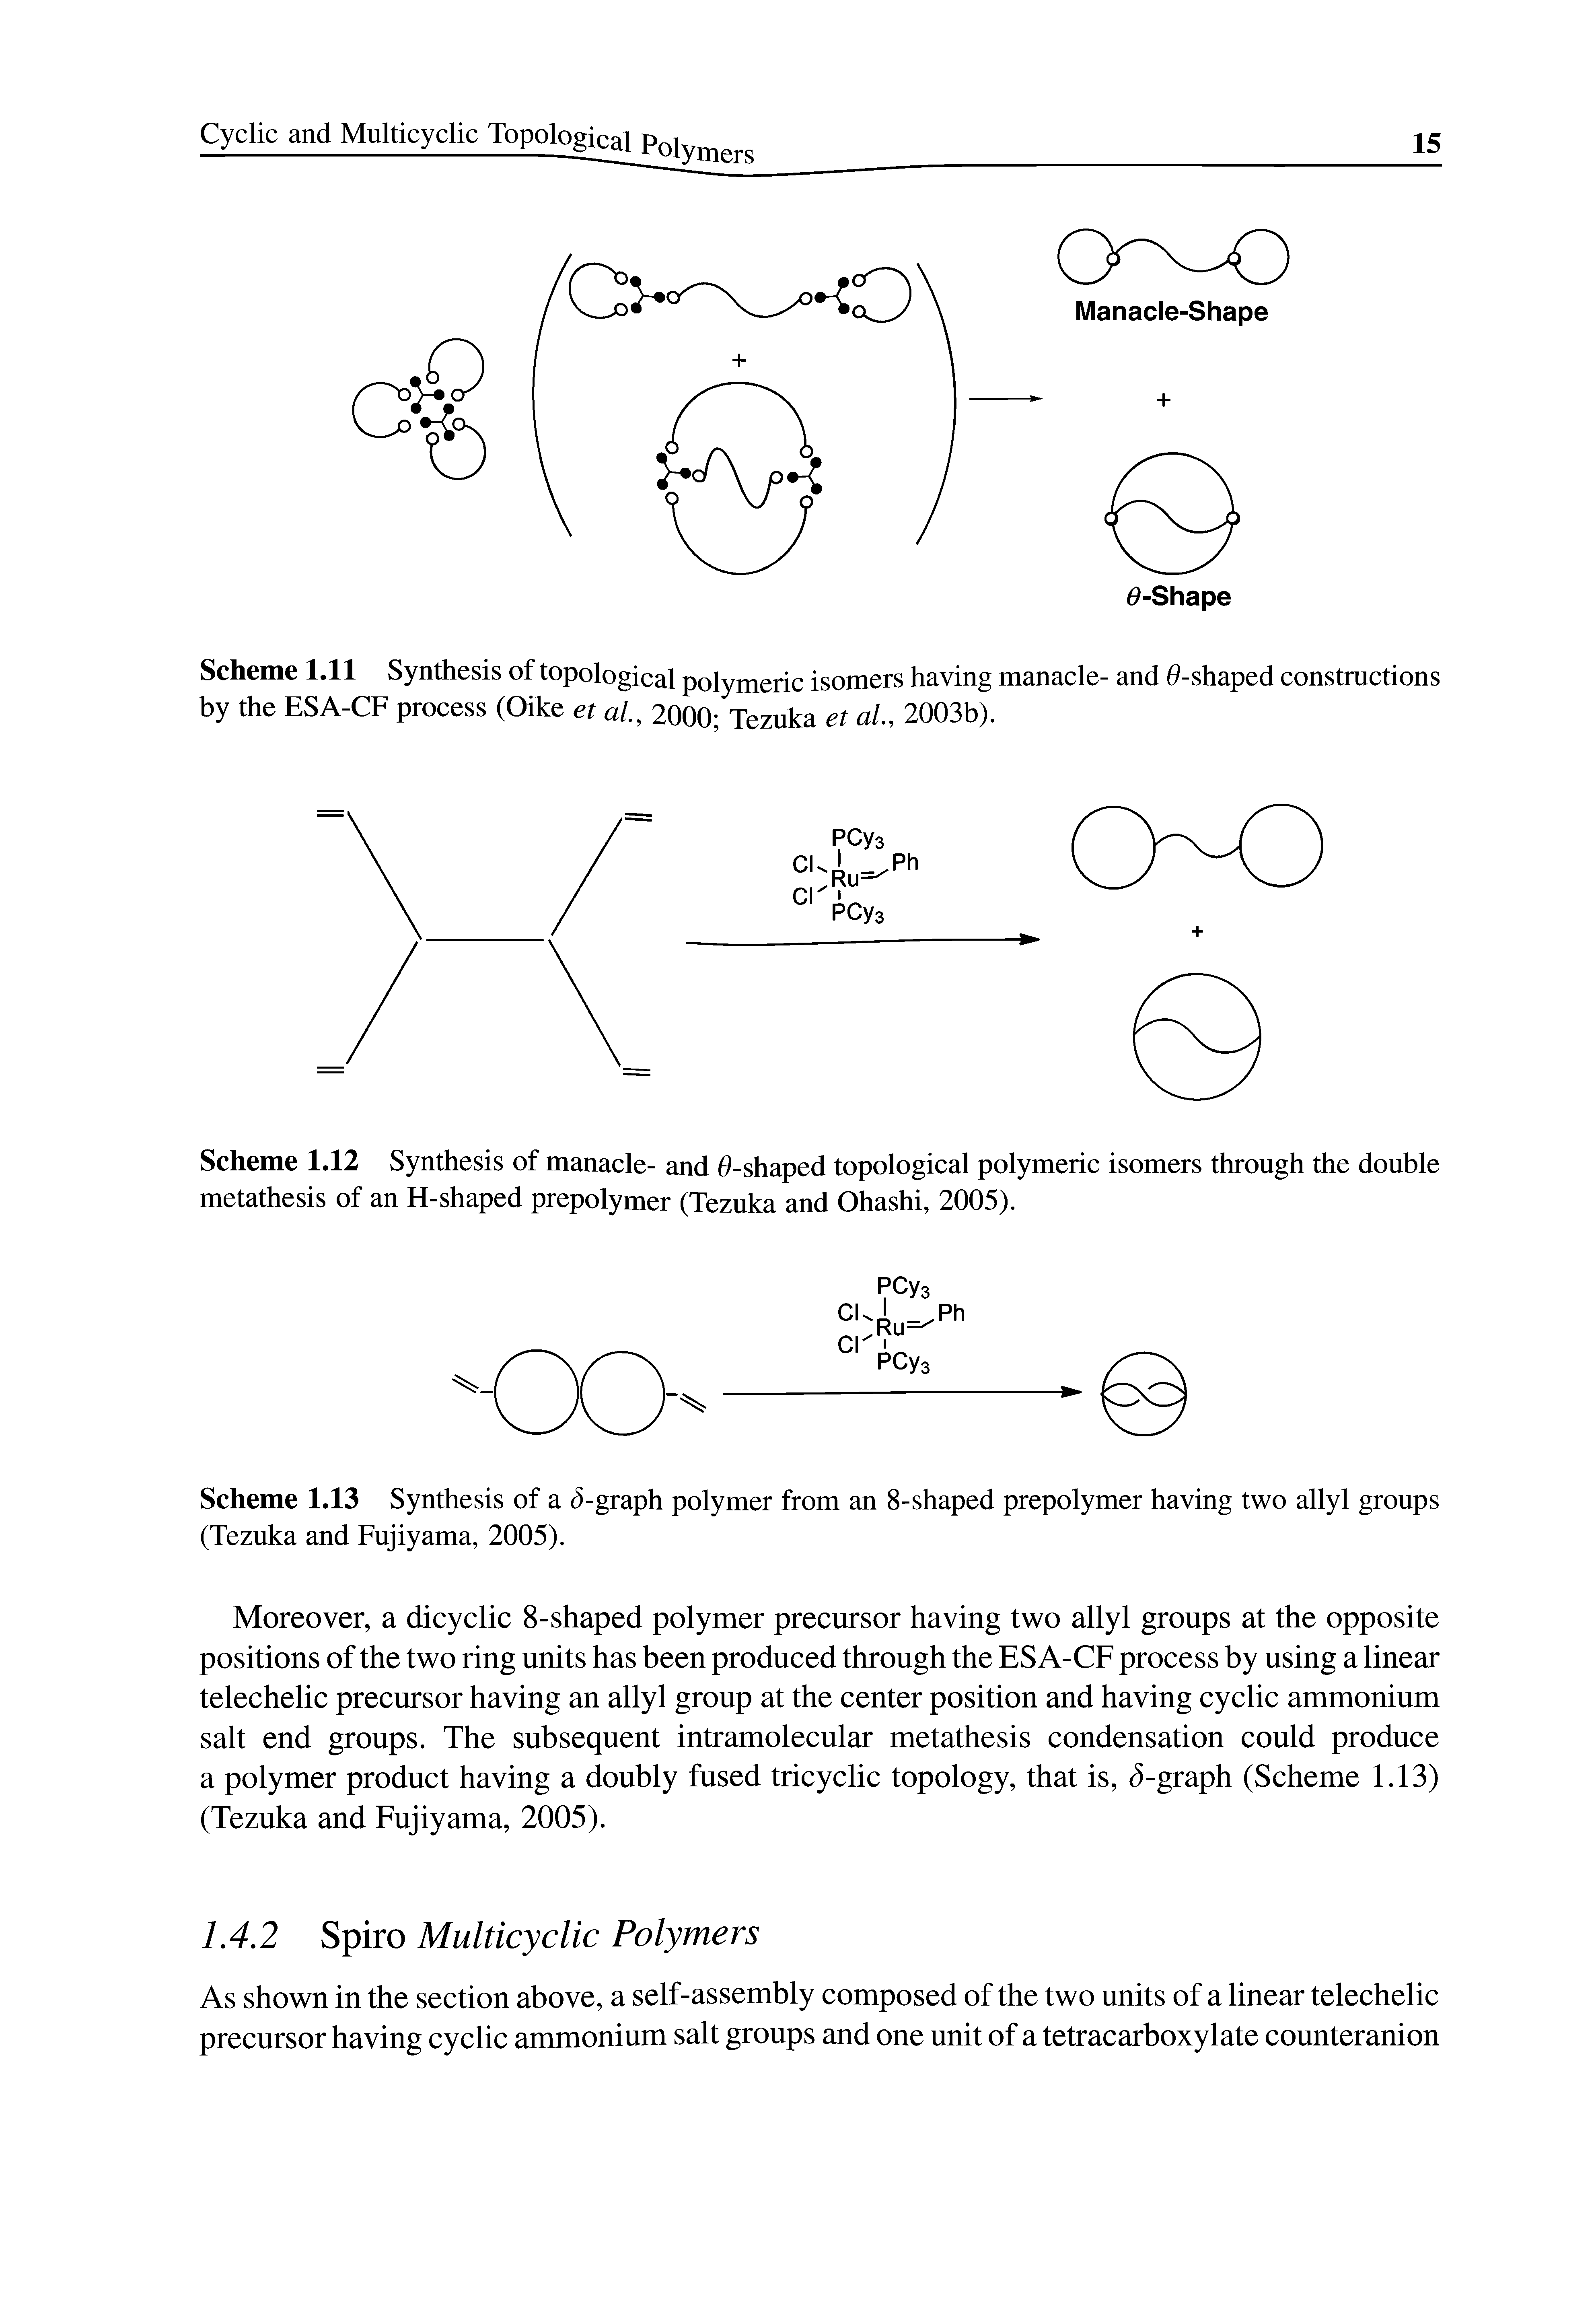 Scheme 1.11 Synthesis of topological polymeric isomers having manacle- and 0-shaped constructions by the ESA-CF process (Oike et al, 2000 Tezuka et al 2003b).